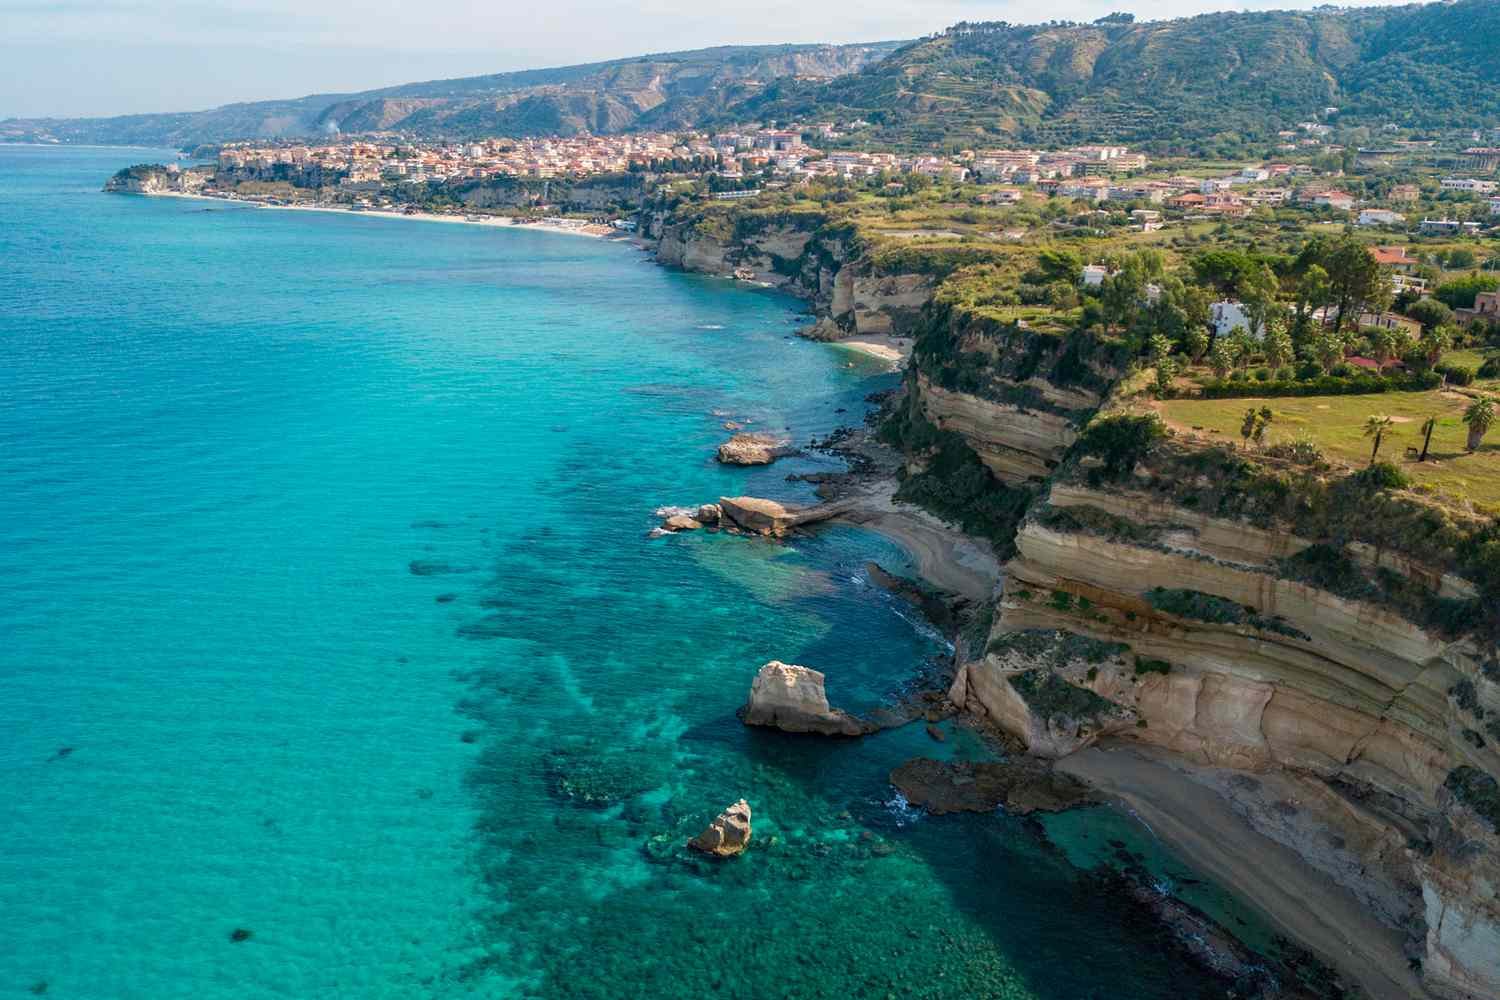 10 Places Where Italians Travel in Italy, According to a Local